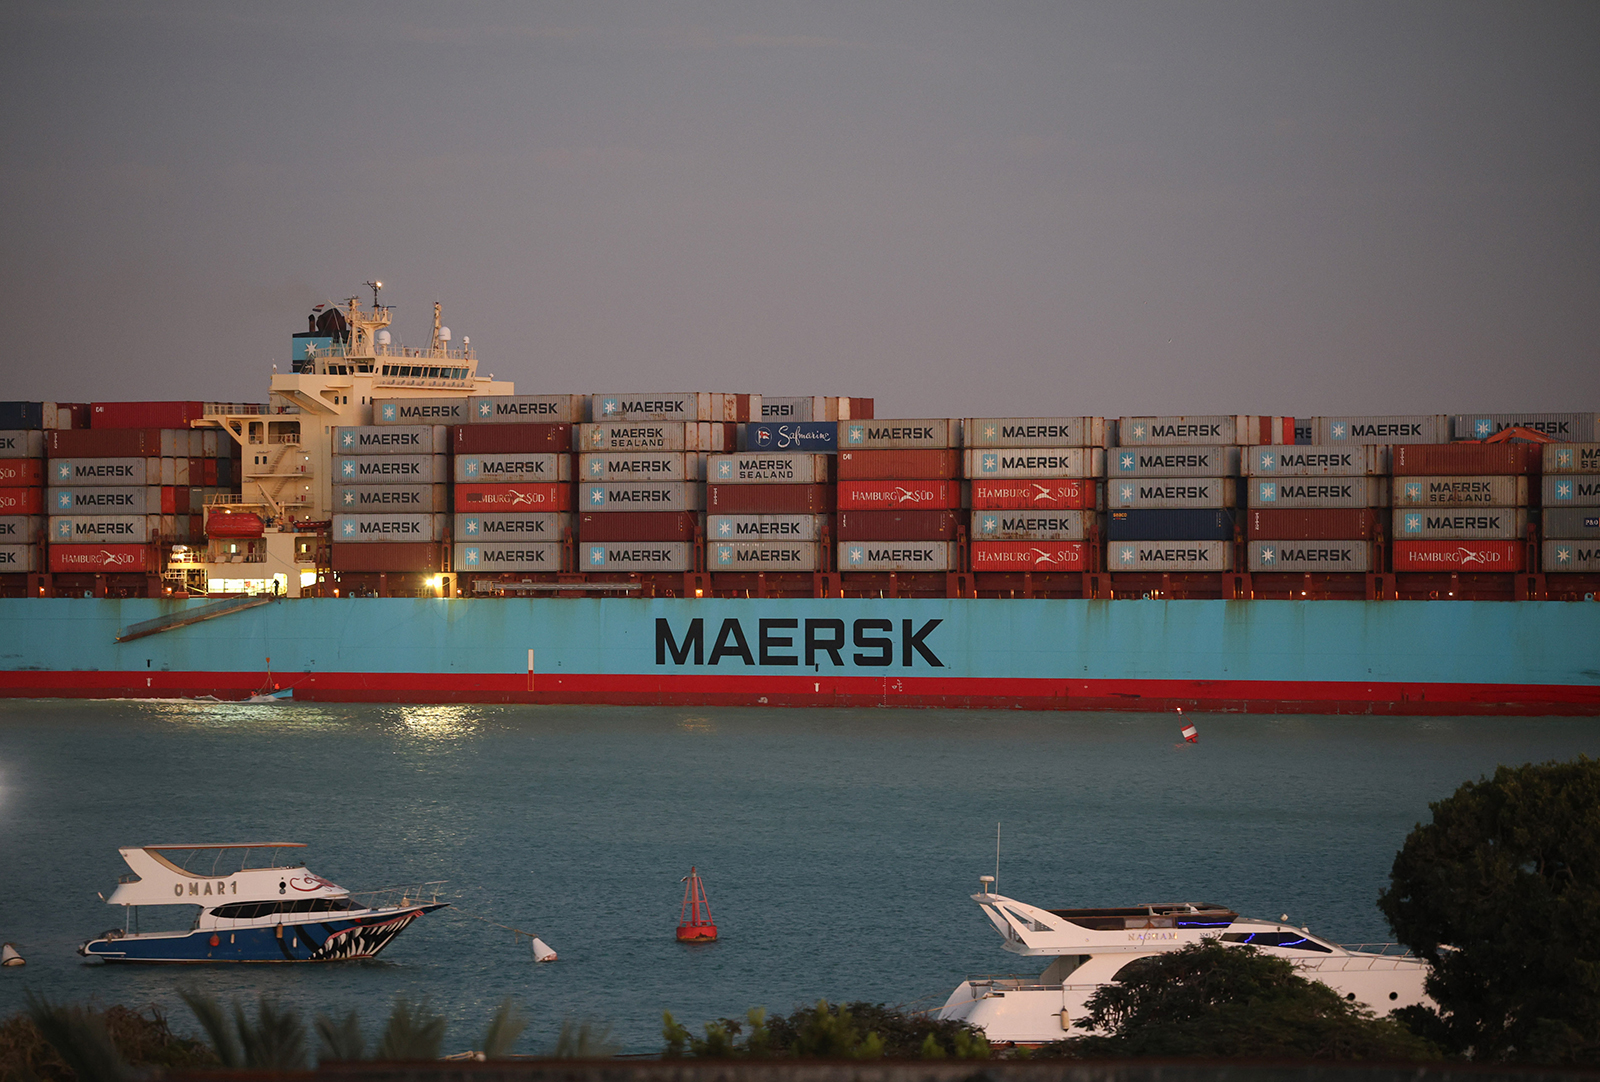 The Maersk Sentosa container ship sails southbound to exit the Suez Canal in Suez, Egypt, on December 21.